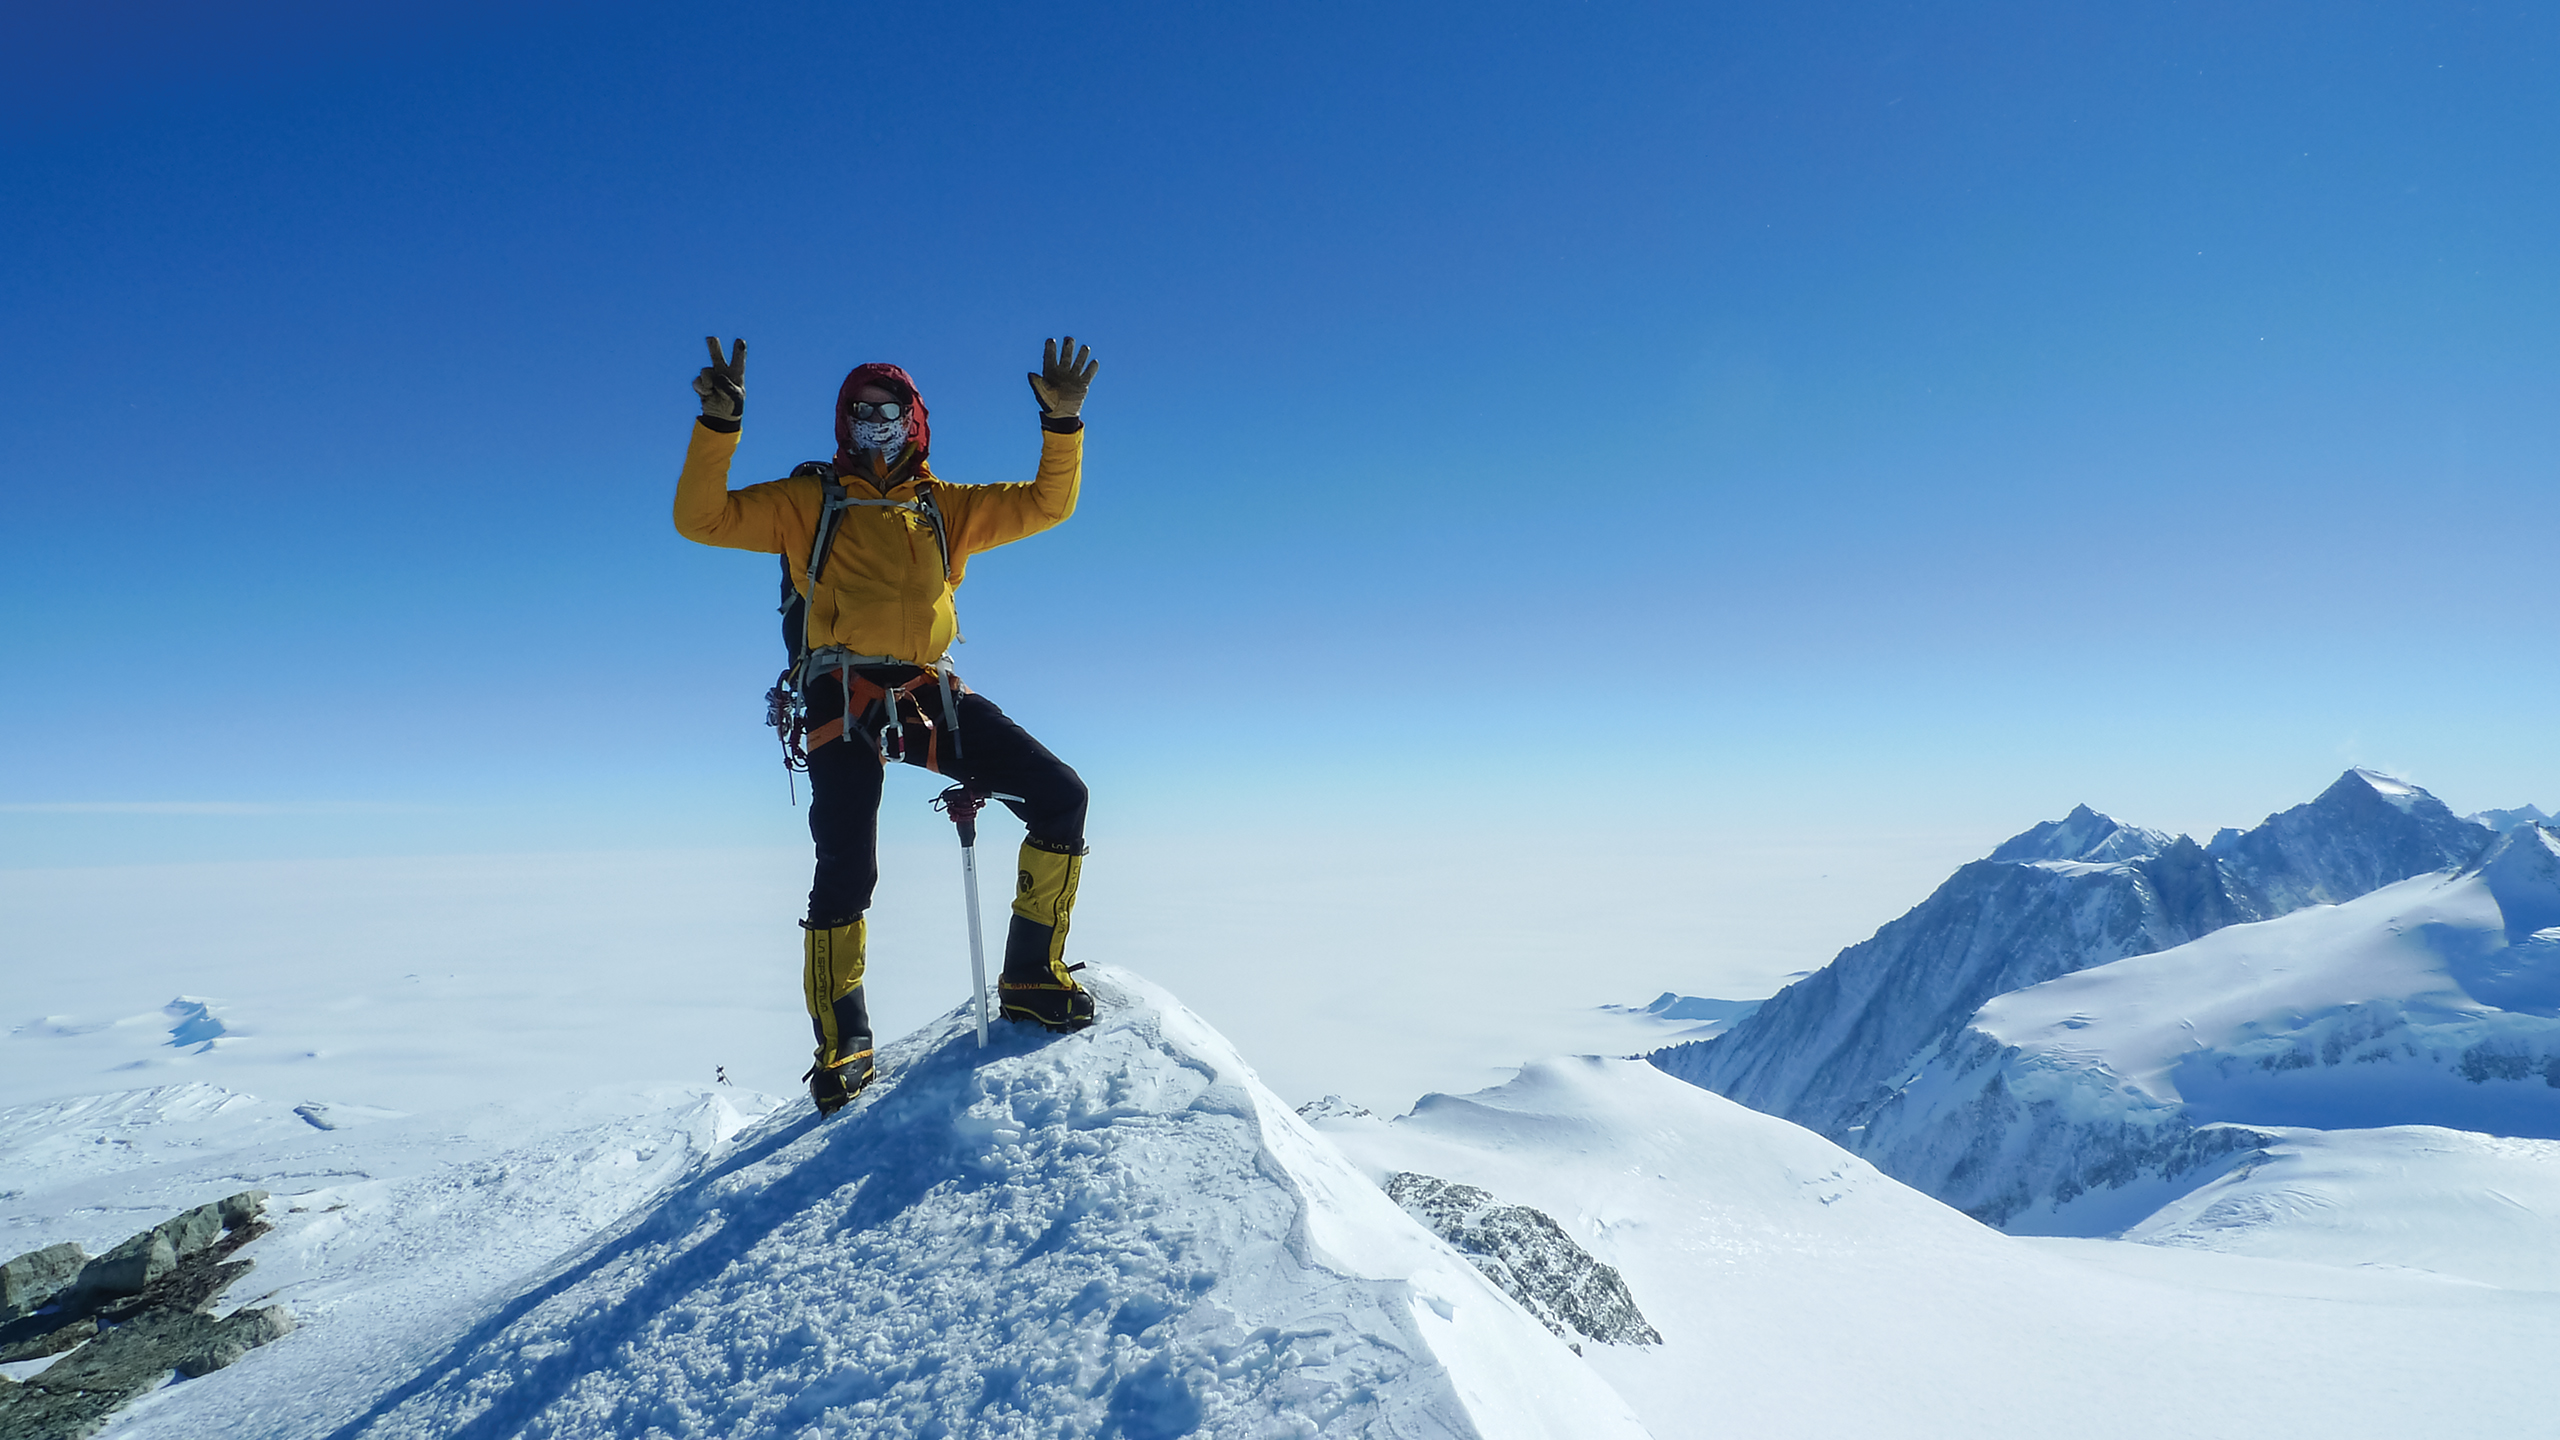 Martin Frey stands on the peak of Antarctica's Mount Vinson with his hands in the air